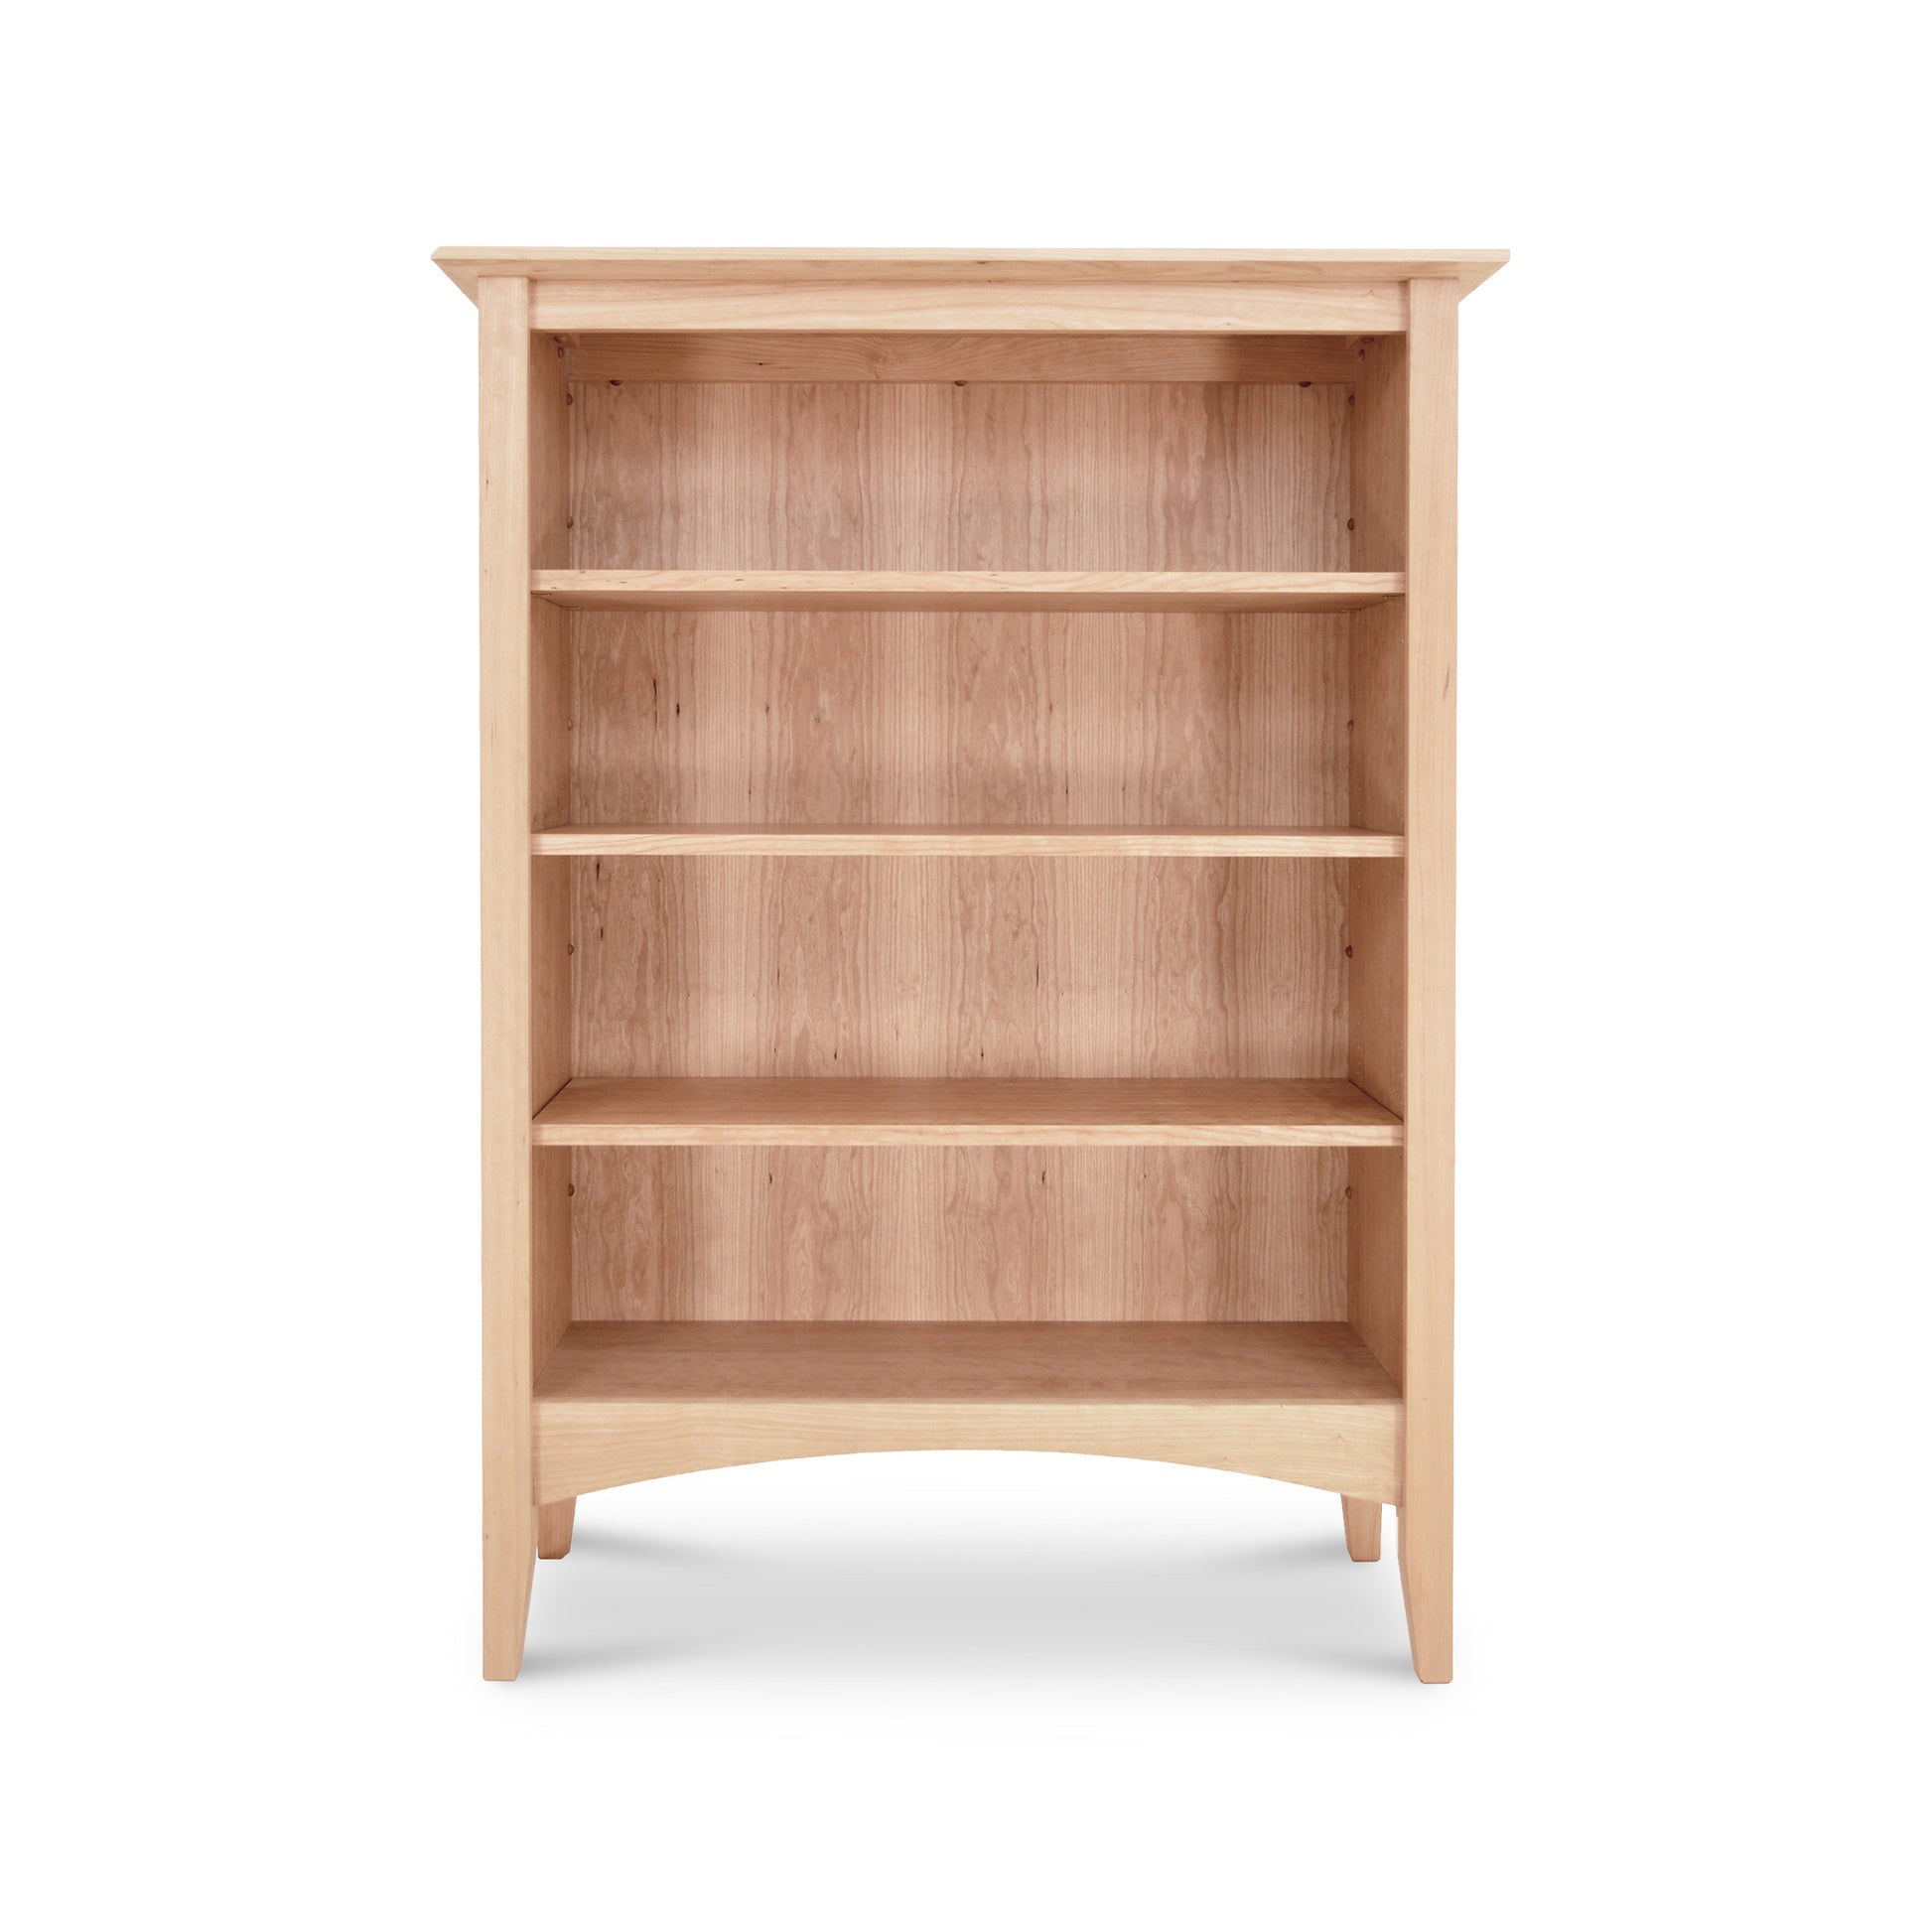 An American Shaker Bookcase from Maple Corner Woodworks, made of sustainably harvested hardwoods, placed on a white background.